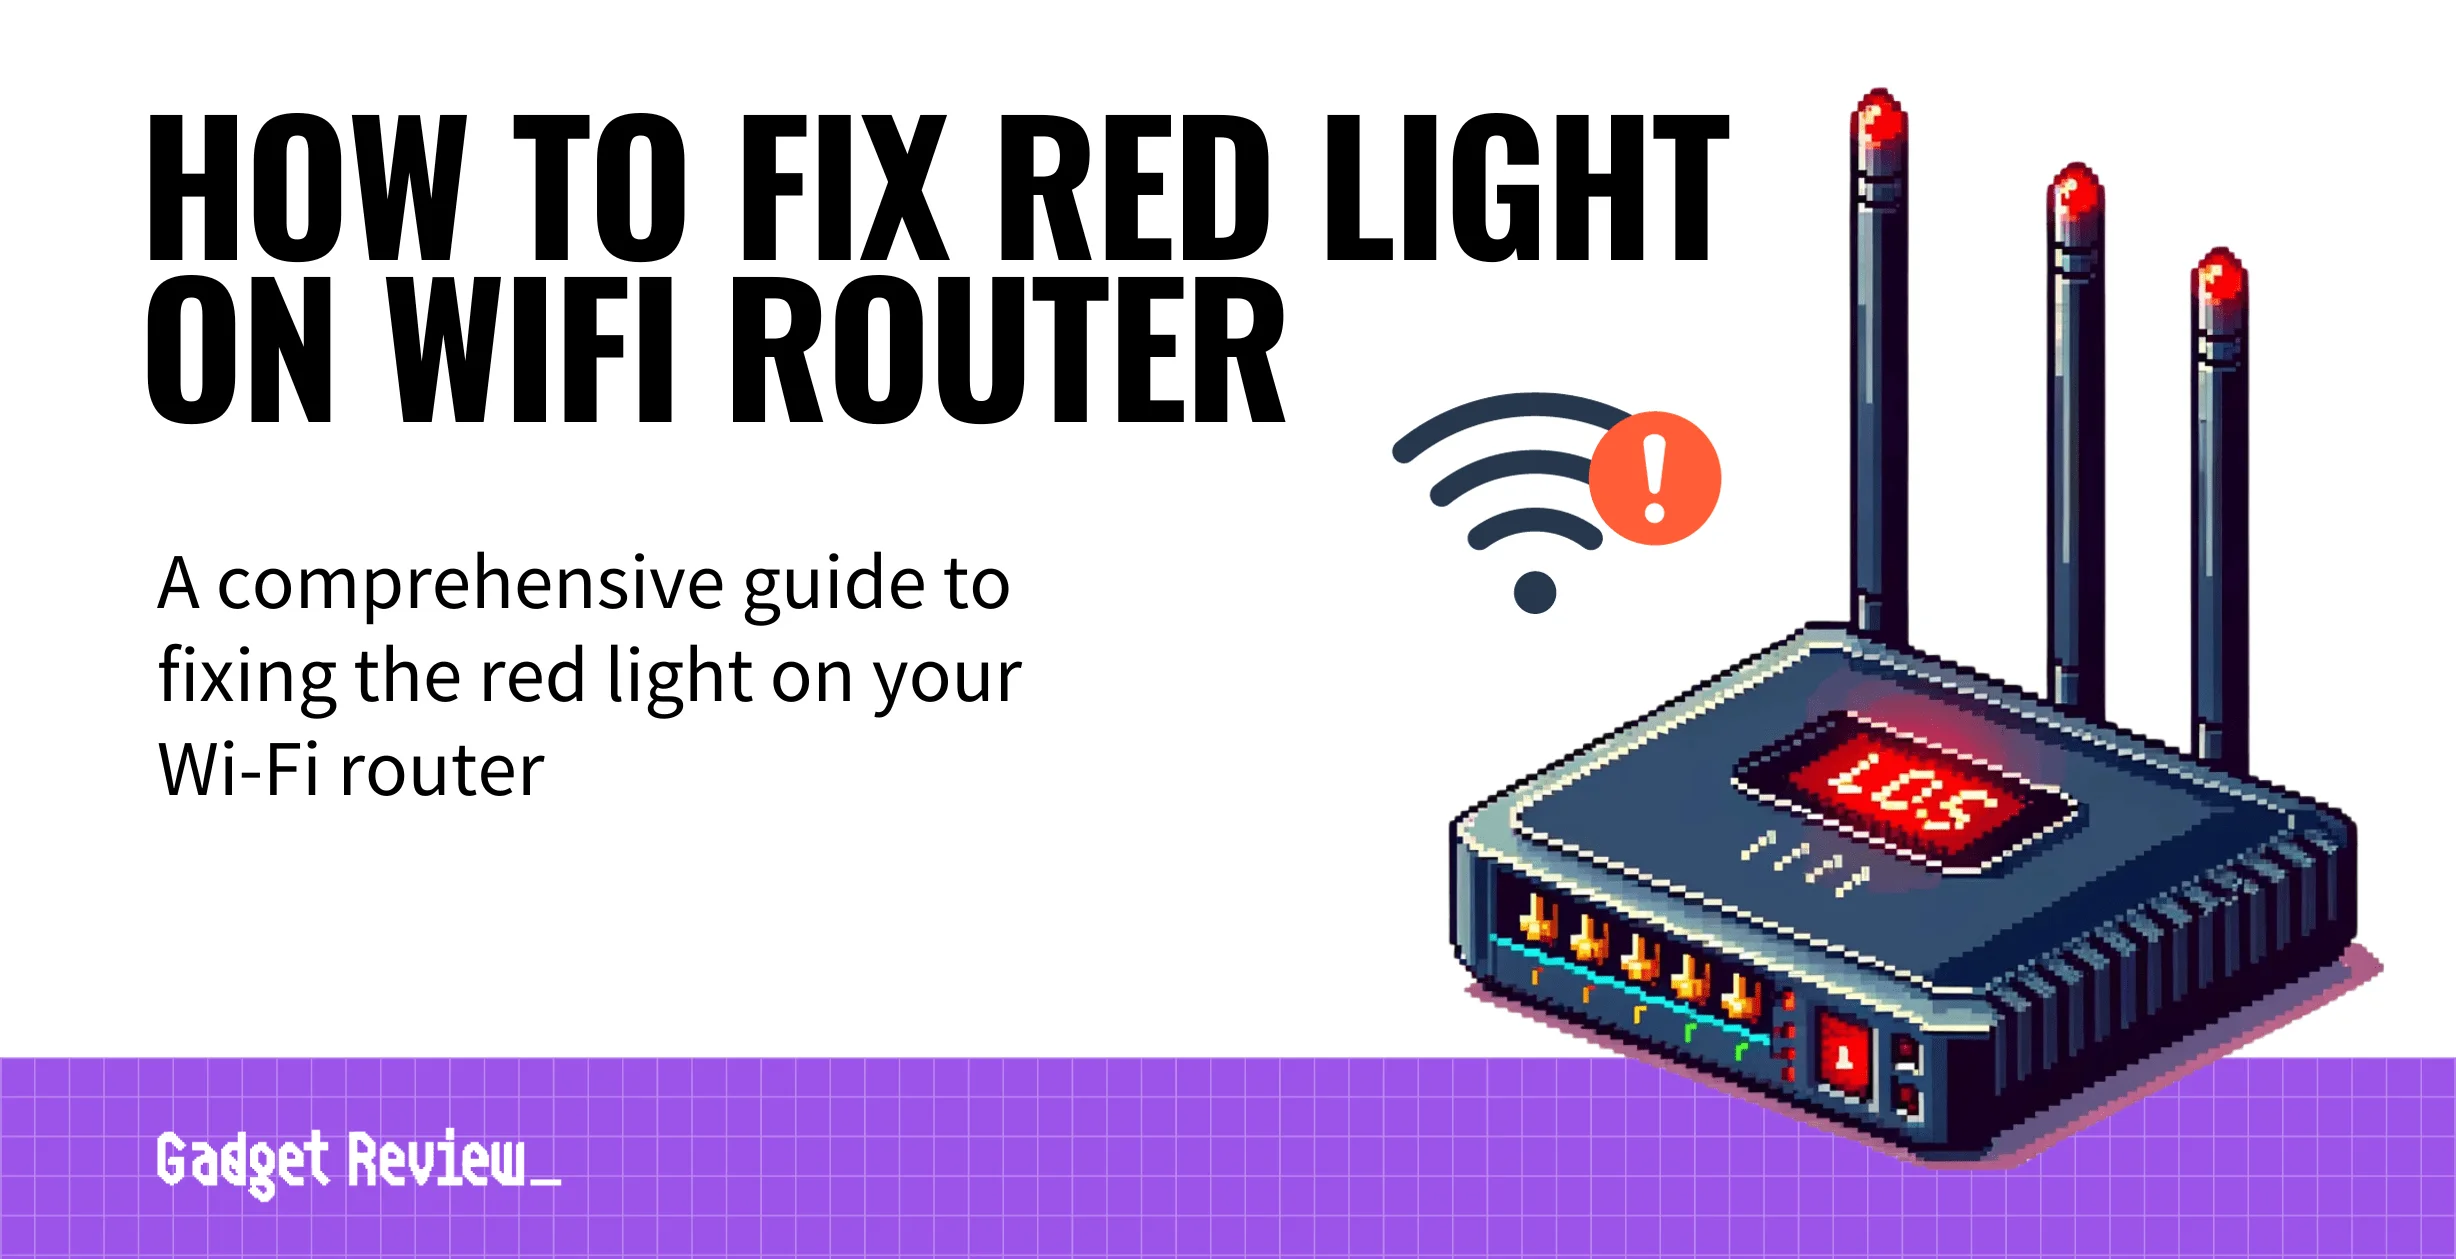 how to fix red light on wifi router guide